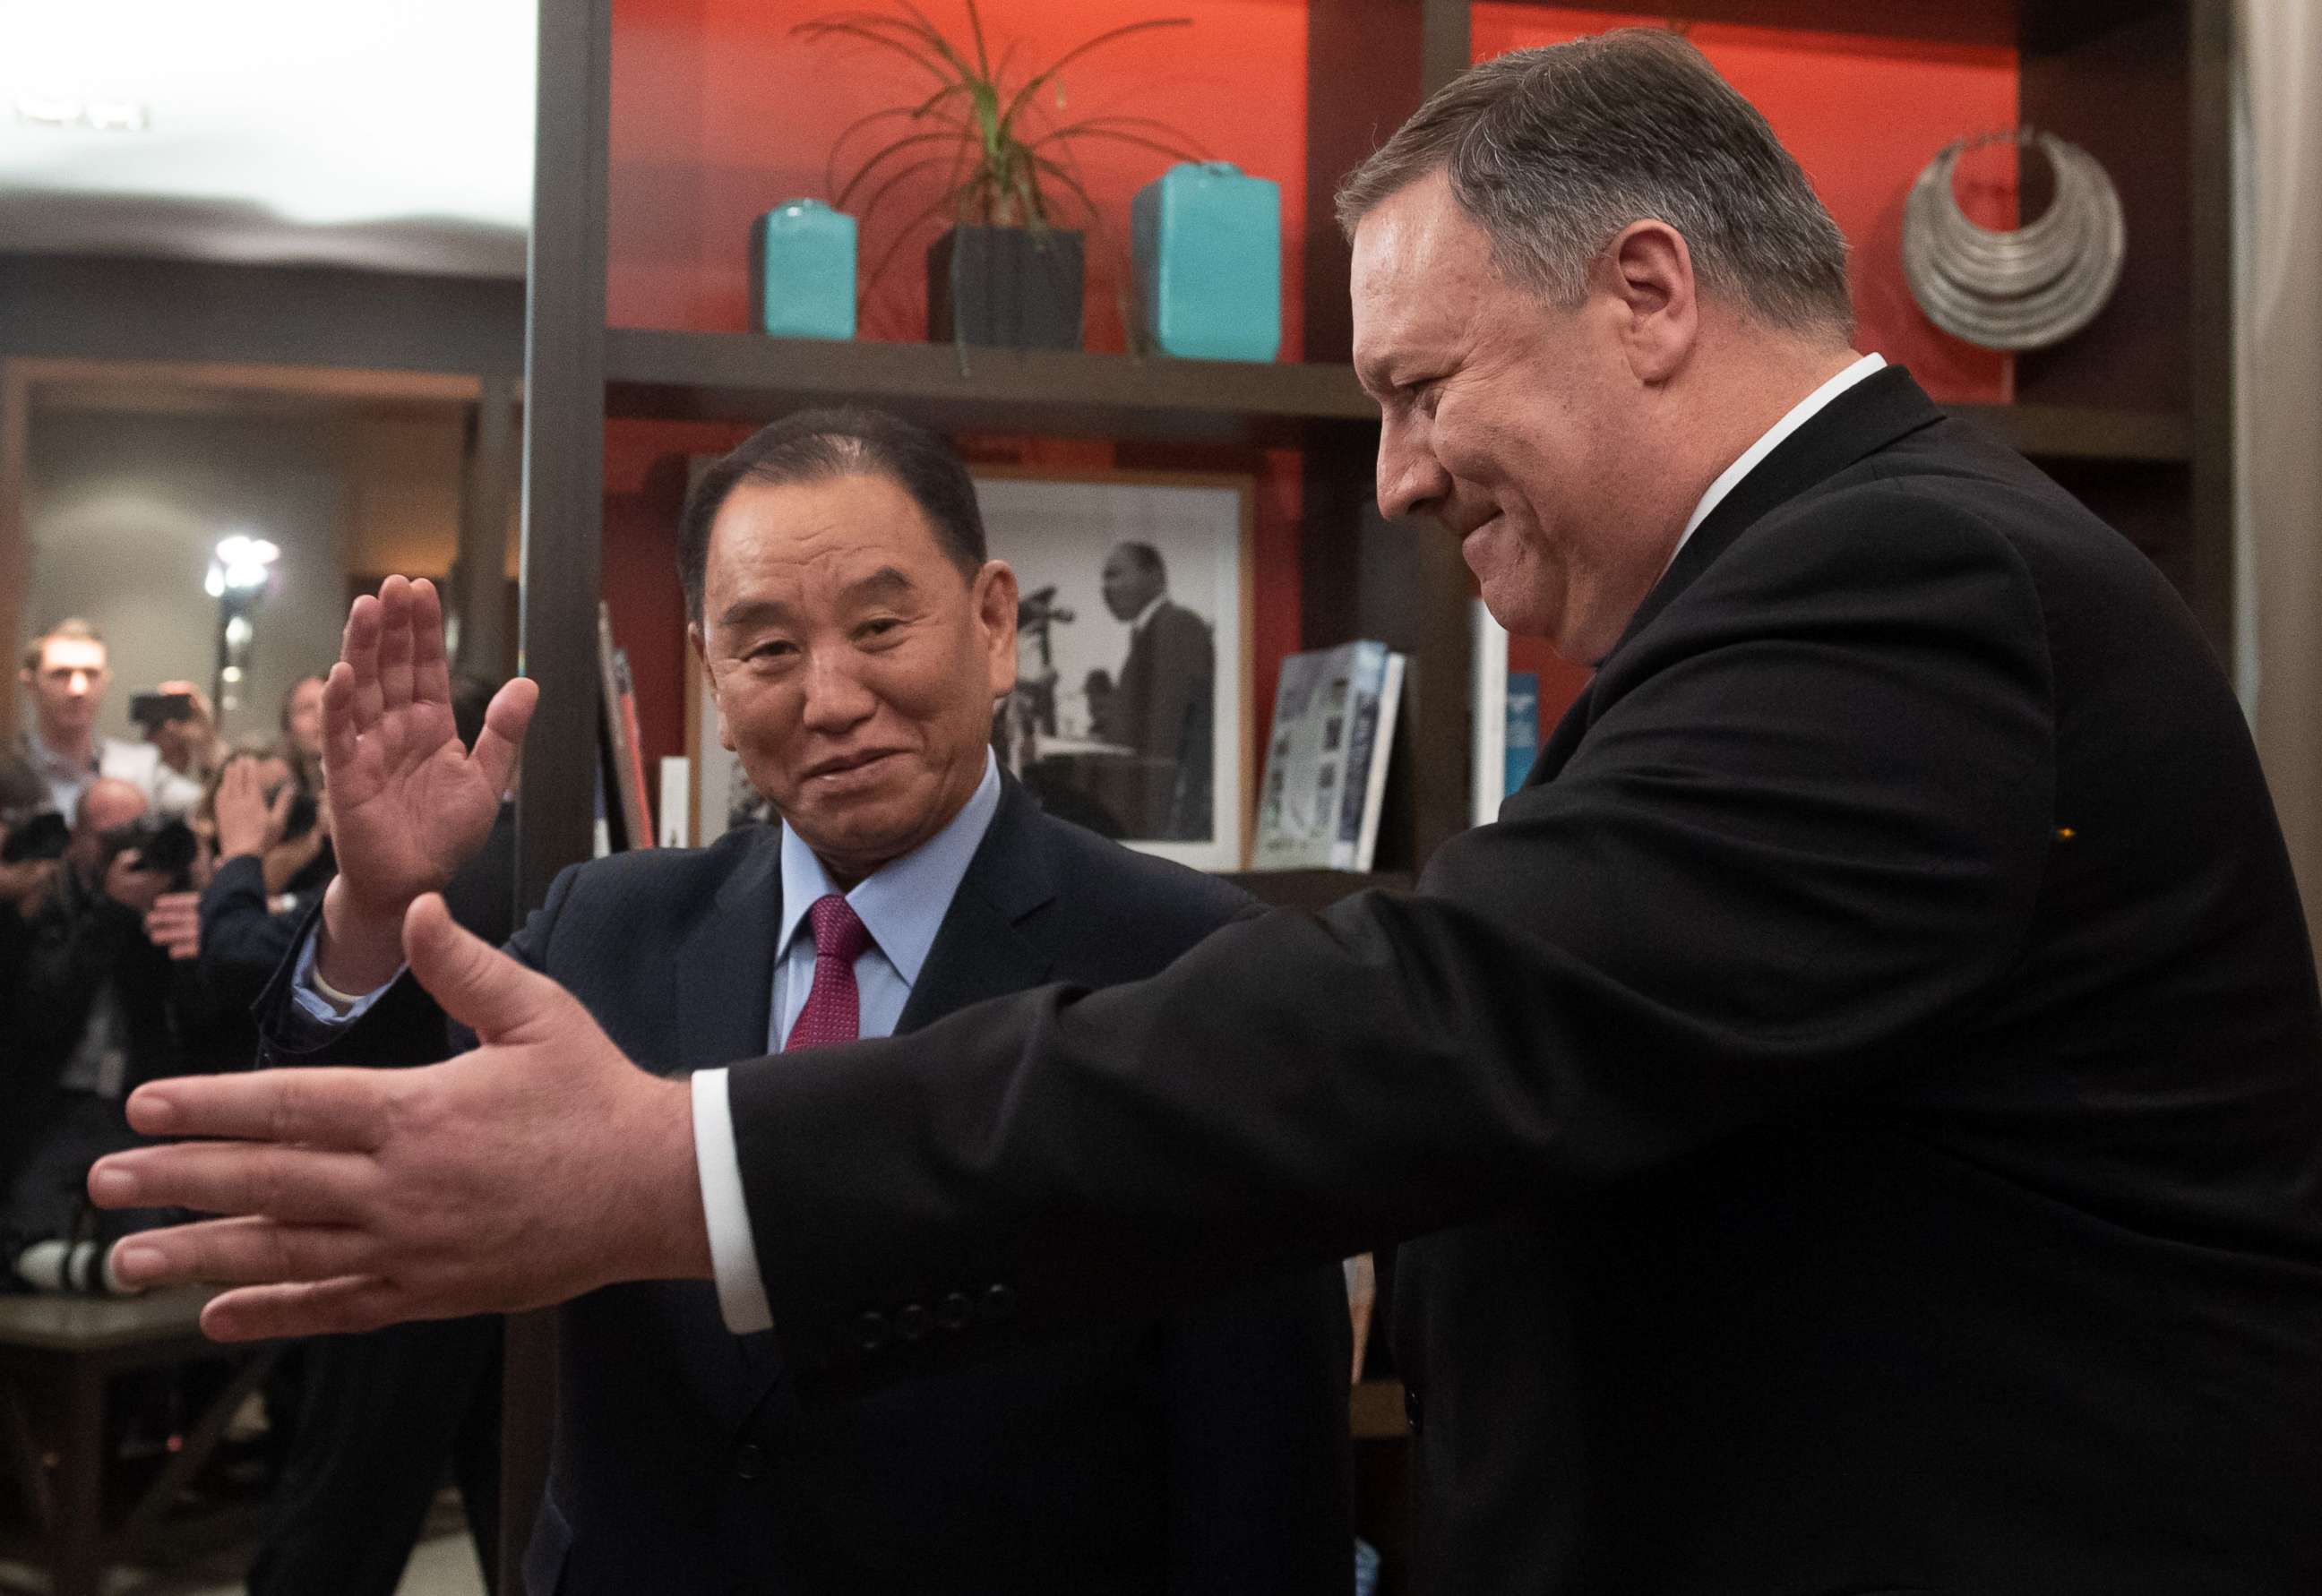 PHOTO: Secretary of State Mike Pompeo welcomes North Korean Vice-Chairman Kim Yong Chol to a meeting in Washington, Jan. 18, 2019.